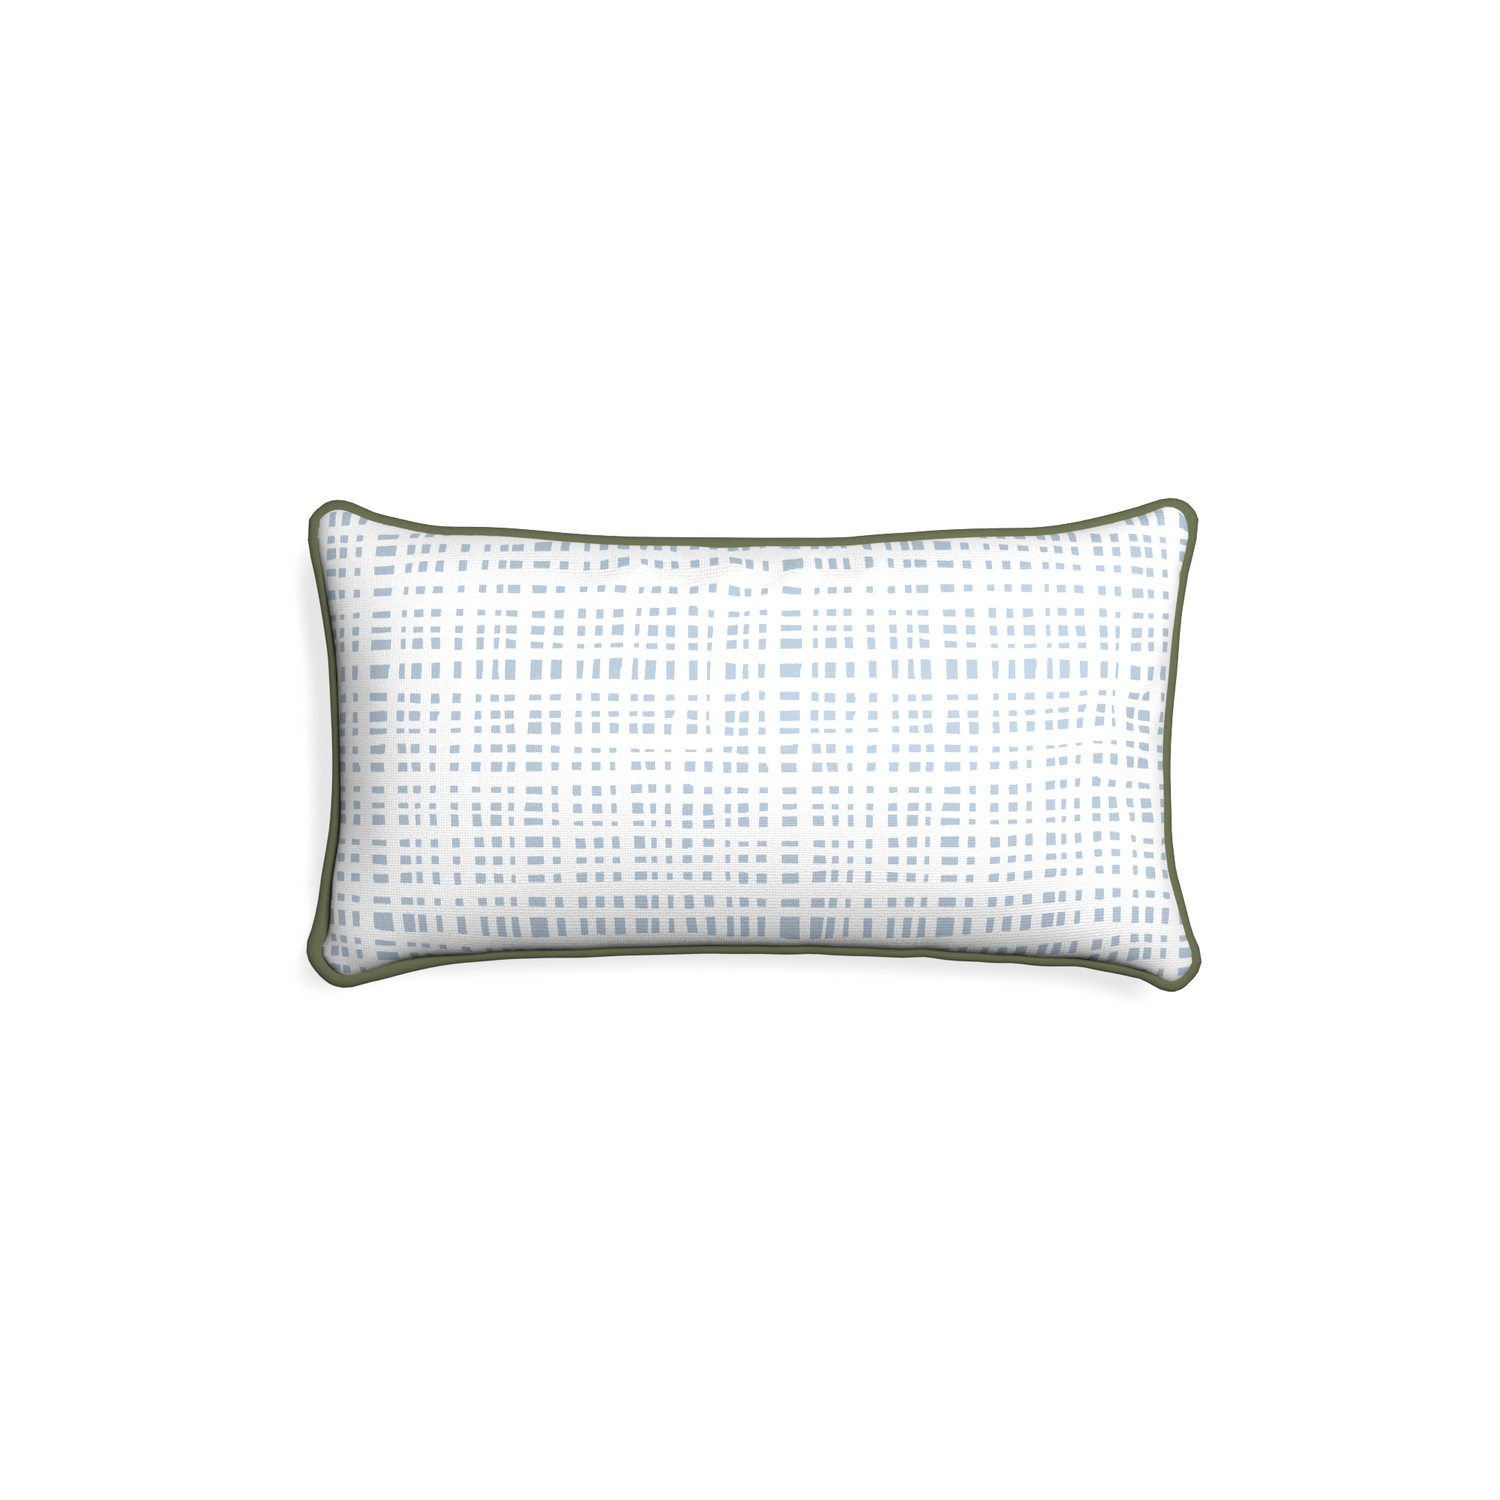 Petite-lumbar ginger sky custom plaid sky bluepillow with f piping on white background